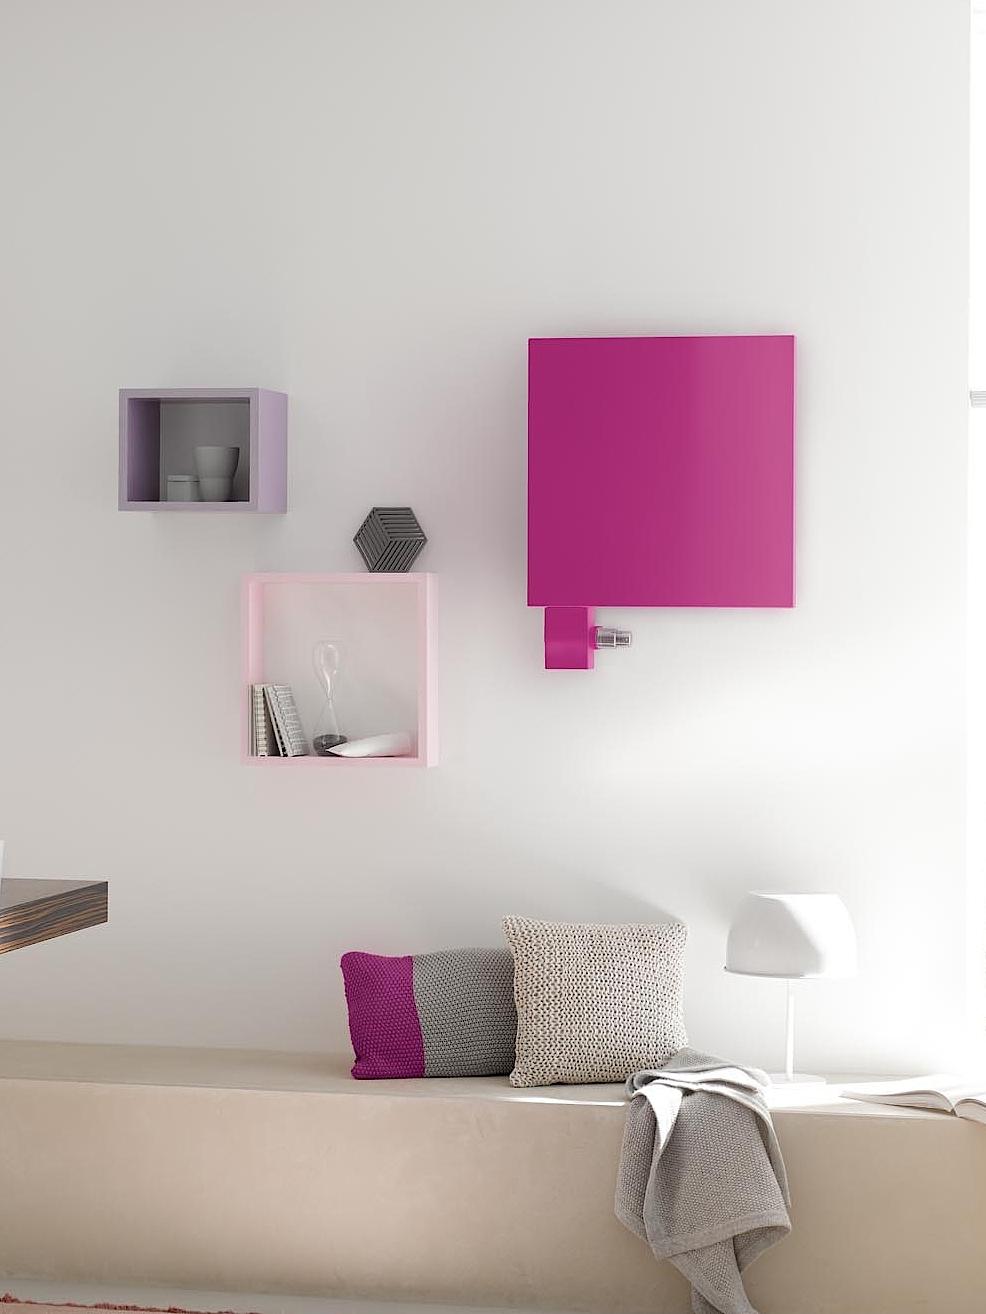 The Kermi Signo designer and bathroom radiator is a real eye-catcher in any room.